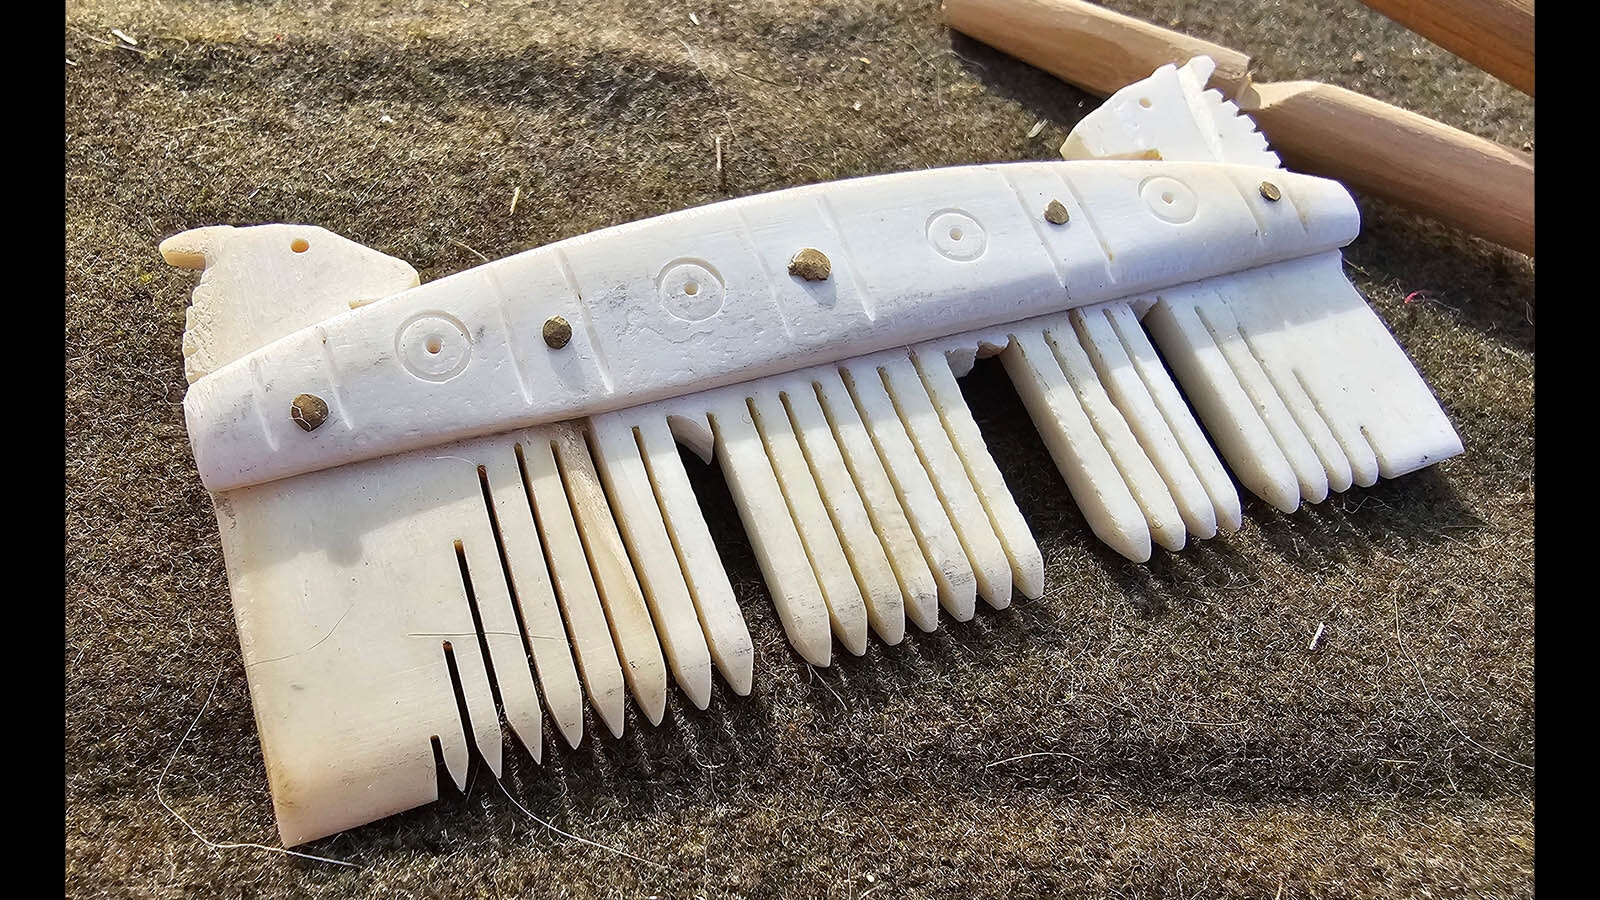 Combs like this handmade one are the most common artifacts found in Viking burial sites.